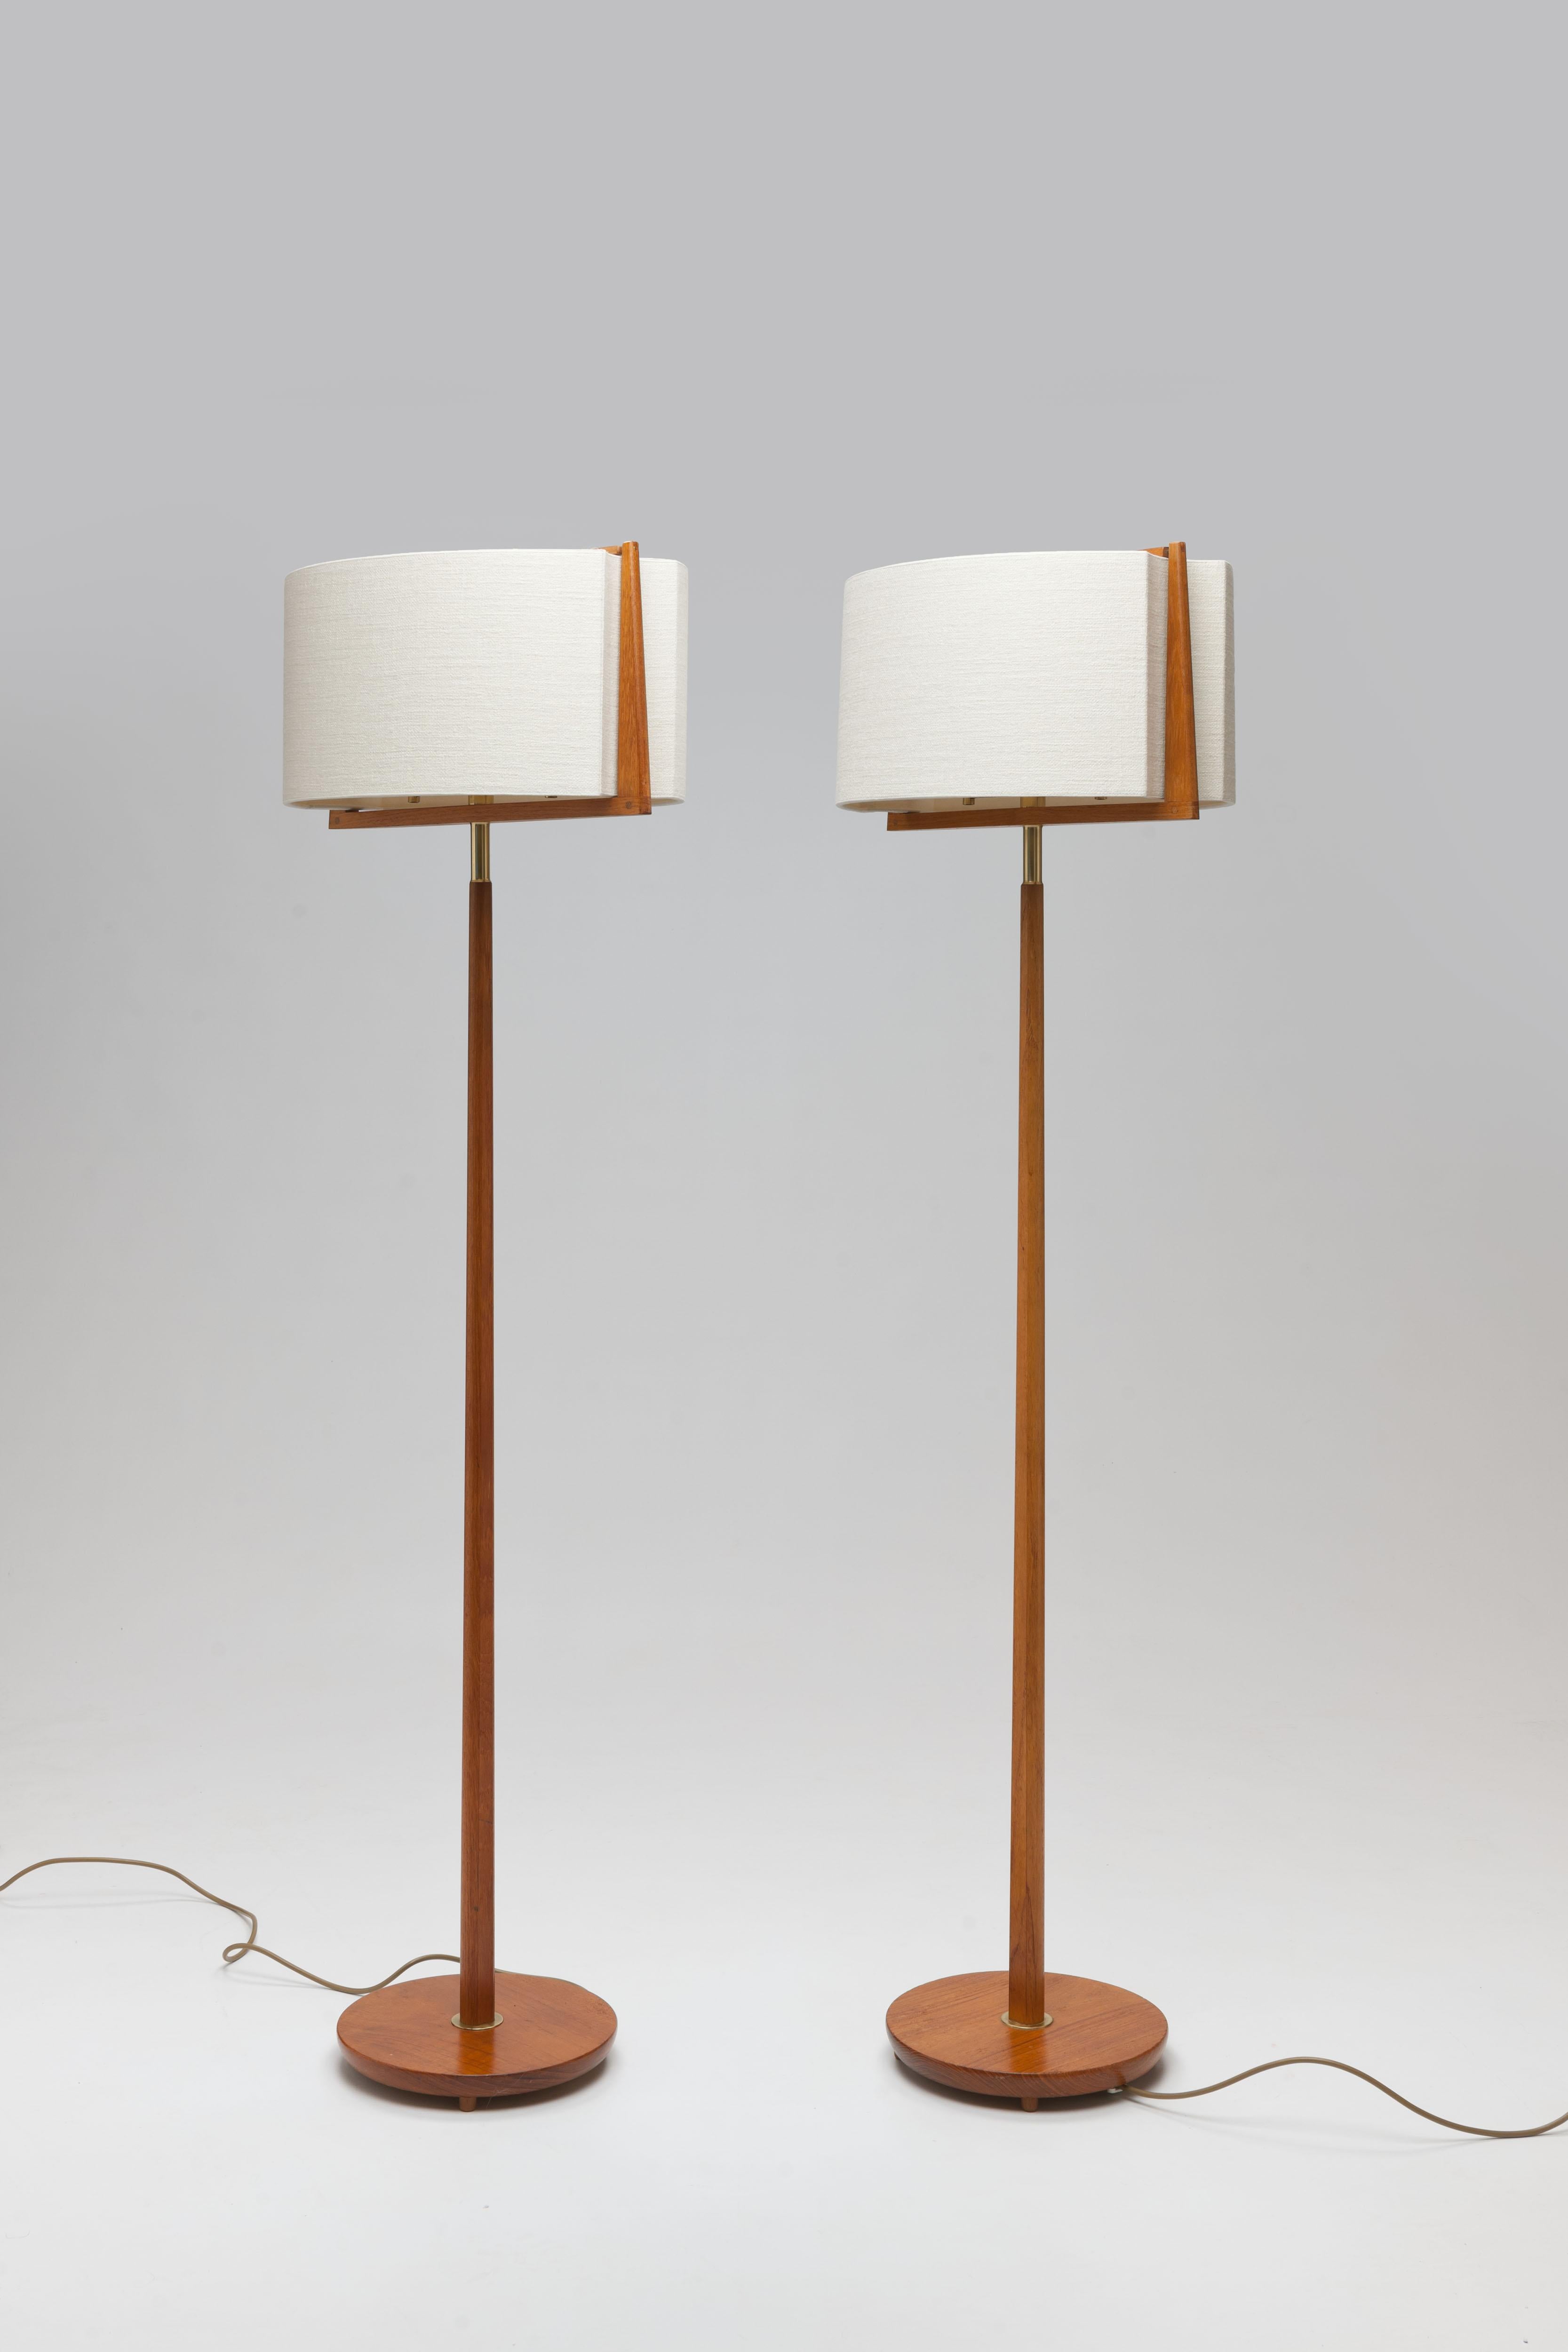 Pair of Teak & Brass Swedish Modern Floor Lamps with Unique Shades in Frame 1